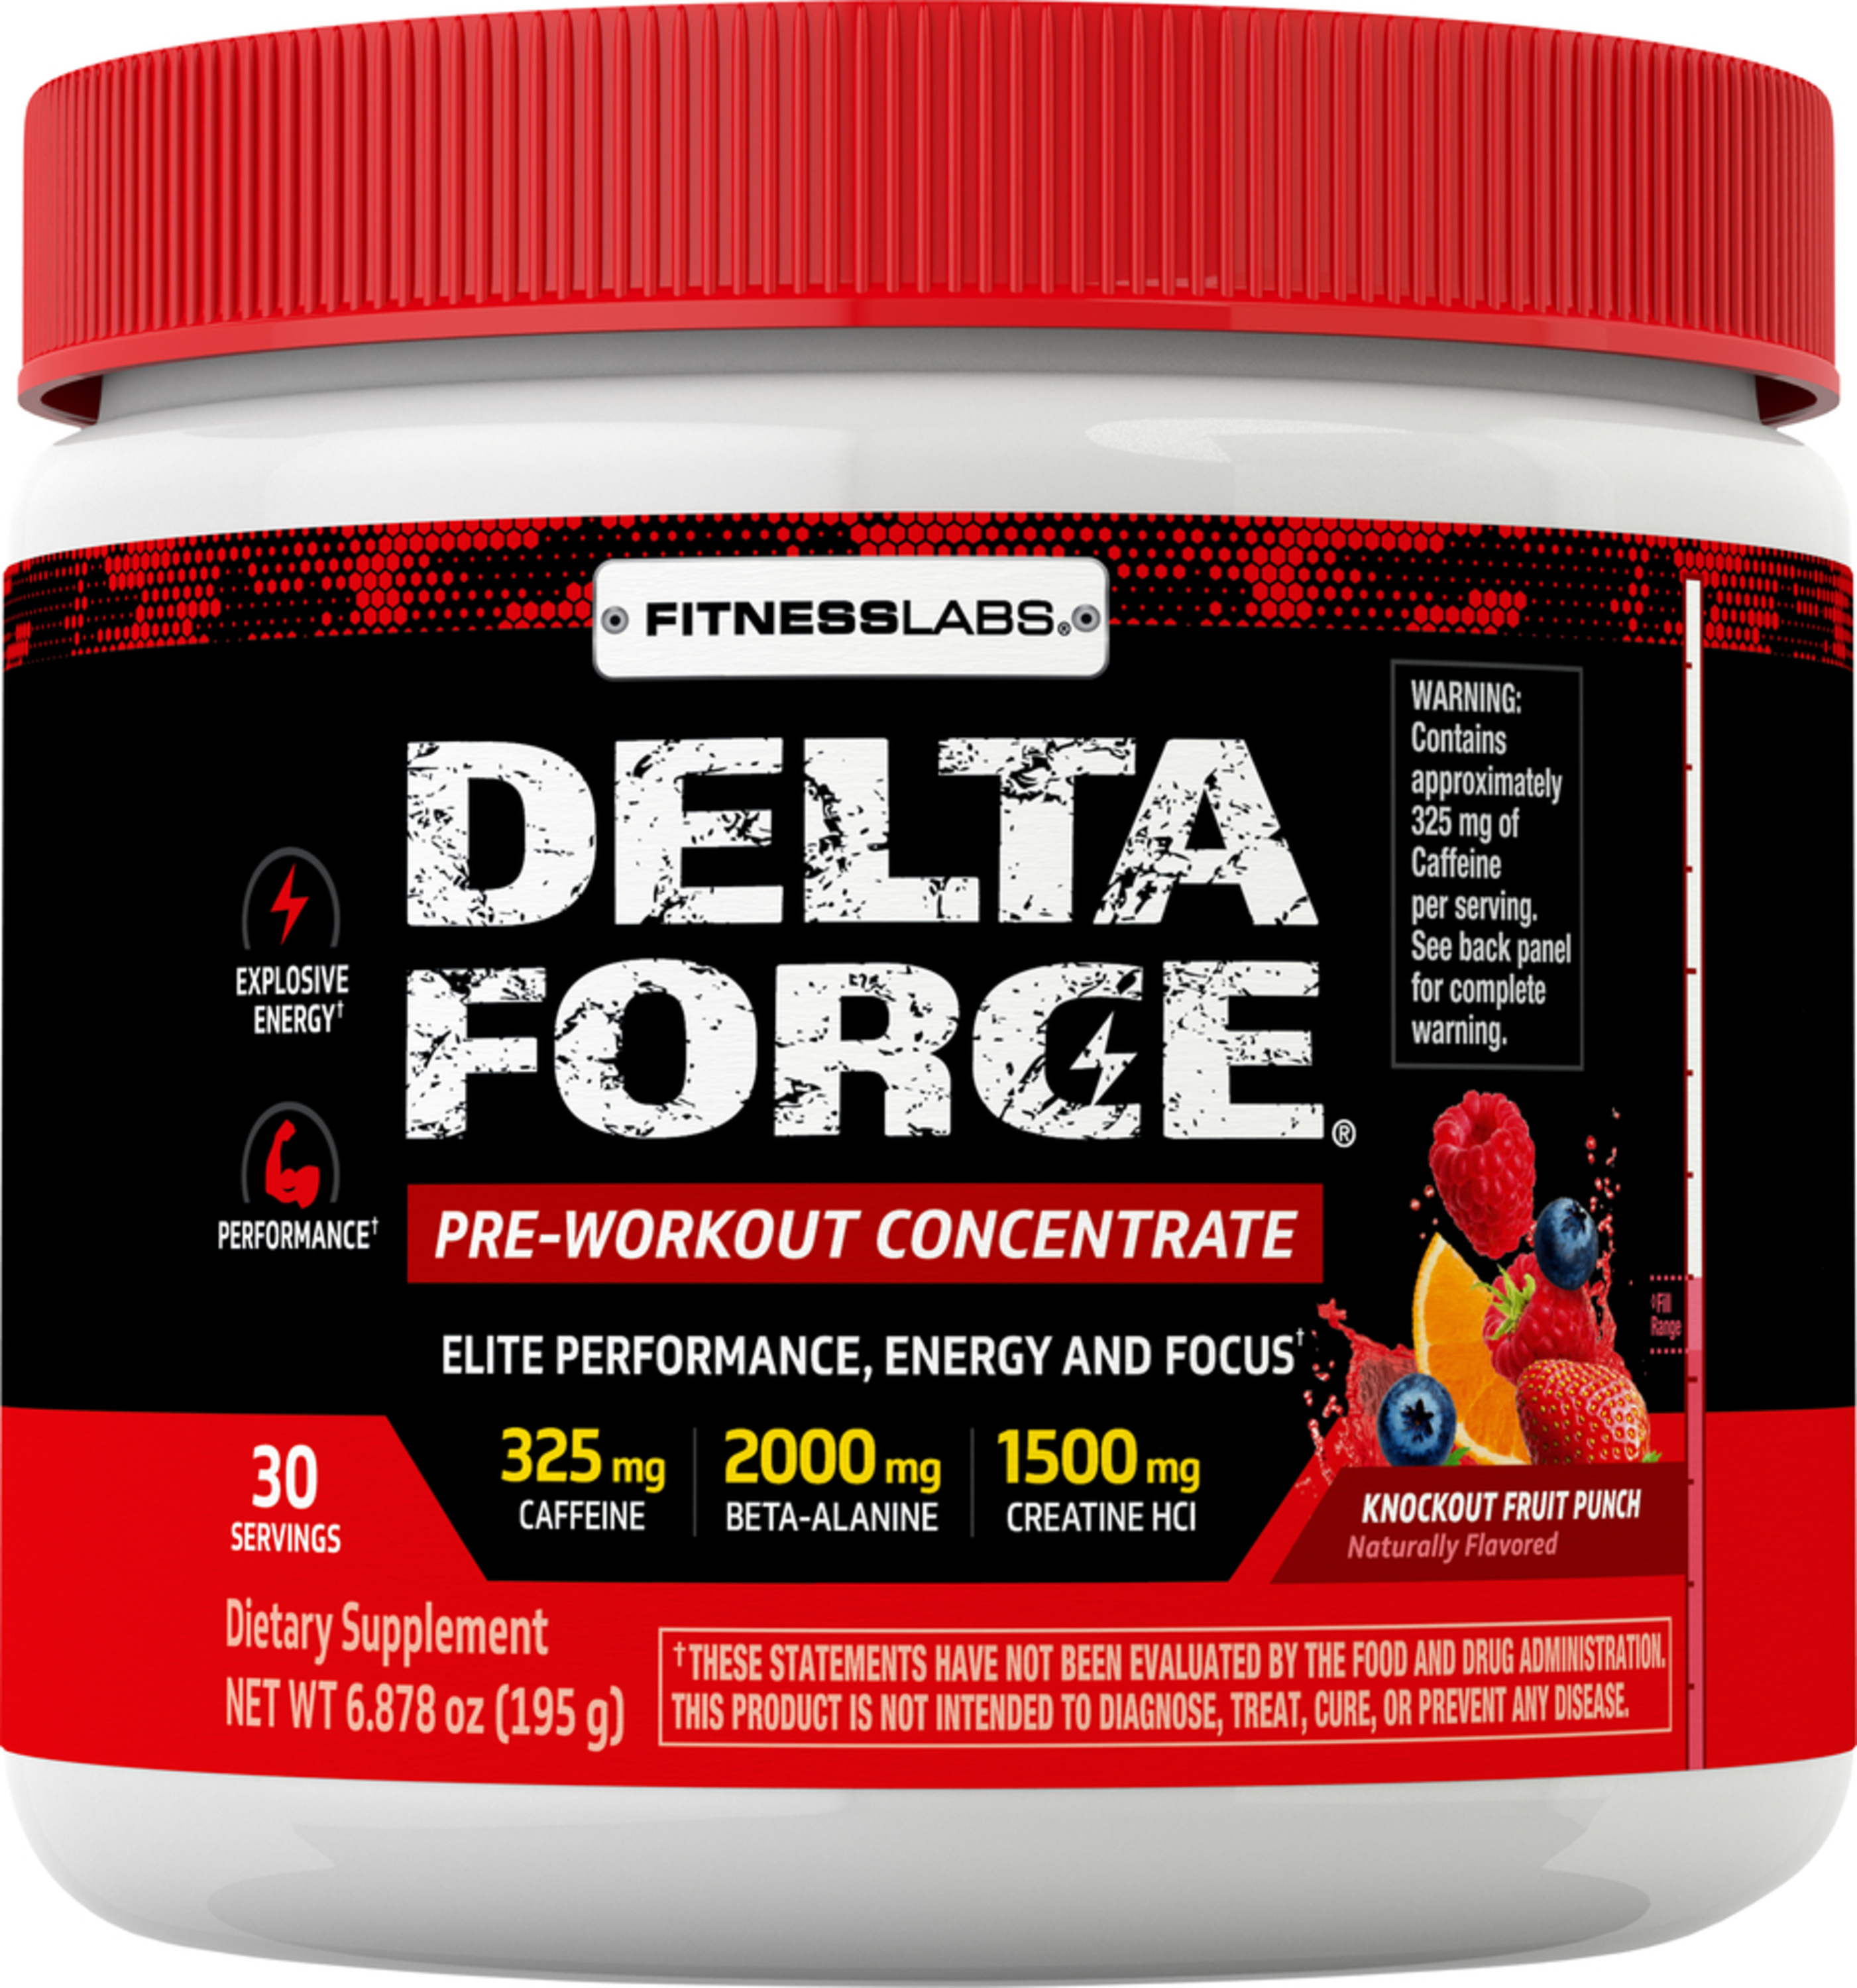 https://cdn2.pipingrock.com/images/product/amazon/product/delta-force-pre-workout-concentrate-powder-knockout-fruit-punch-687-oz-195-g-bottle-23700.jpg?tx=w_3000,h_3000,c_fit&v=3